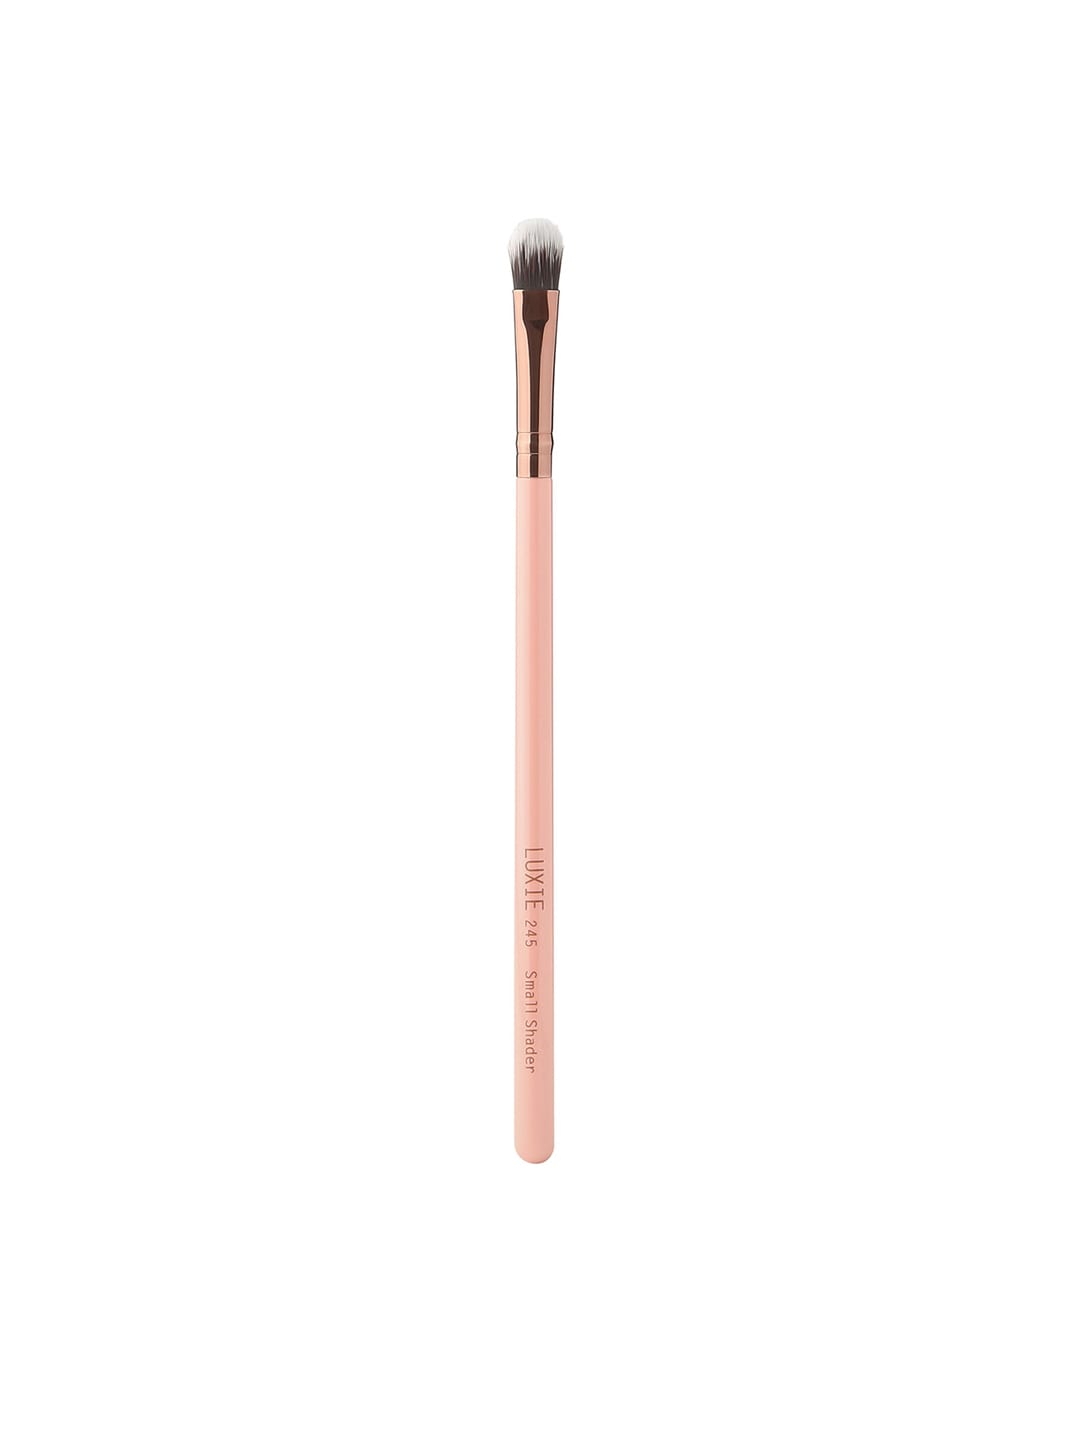 LUXIE Rose Gold Small Shader Brush - 245 Price in India